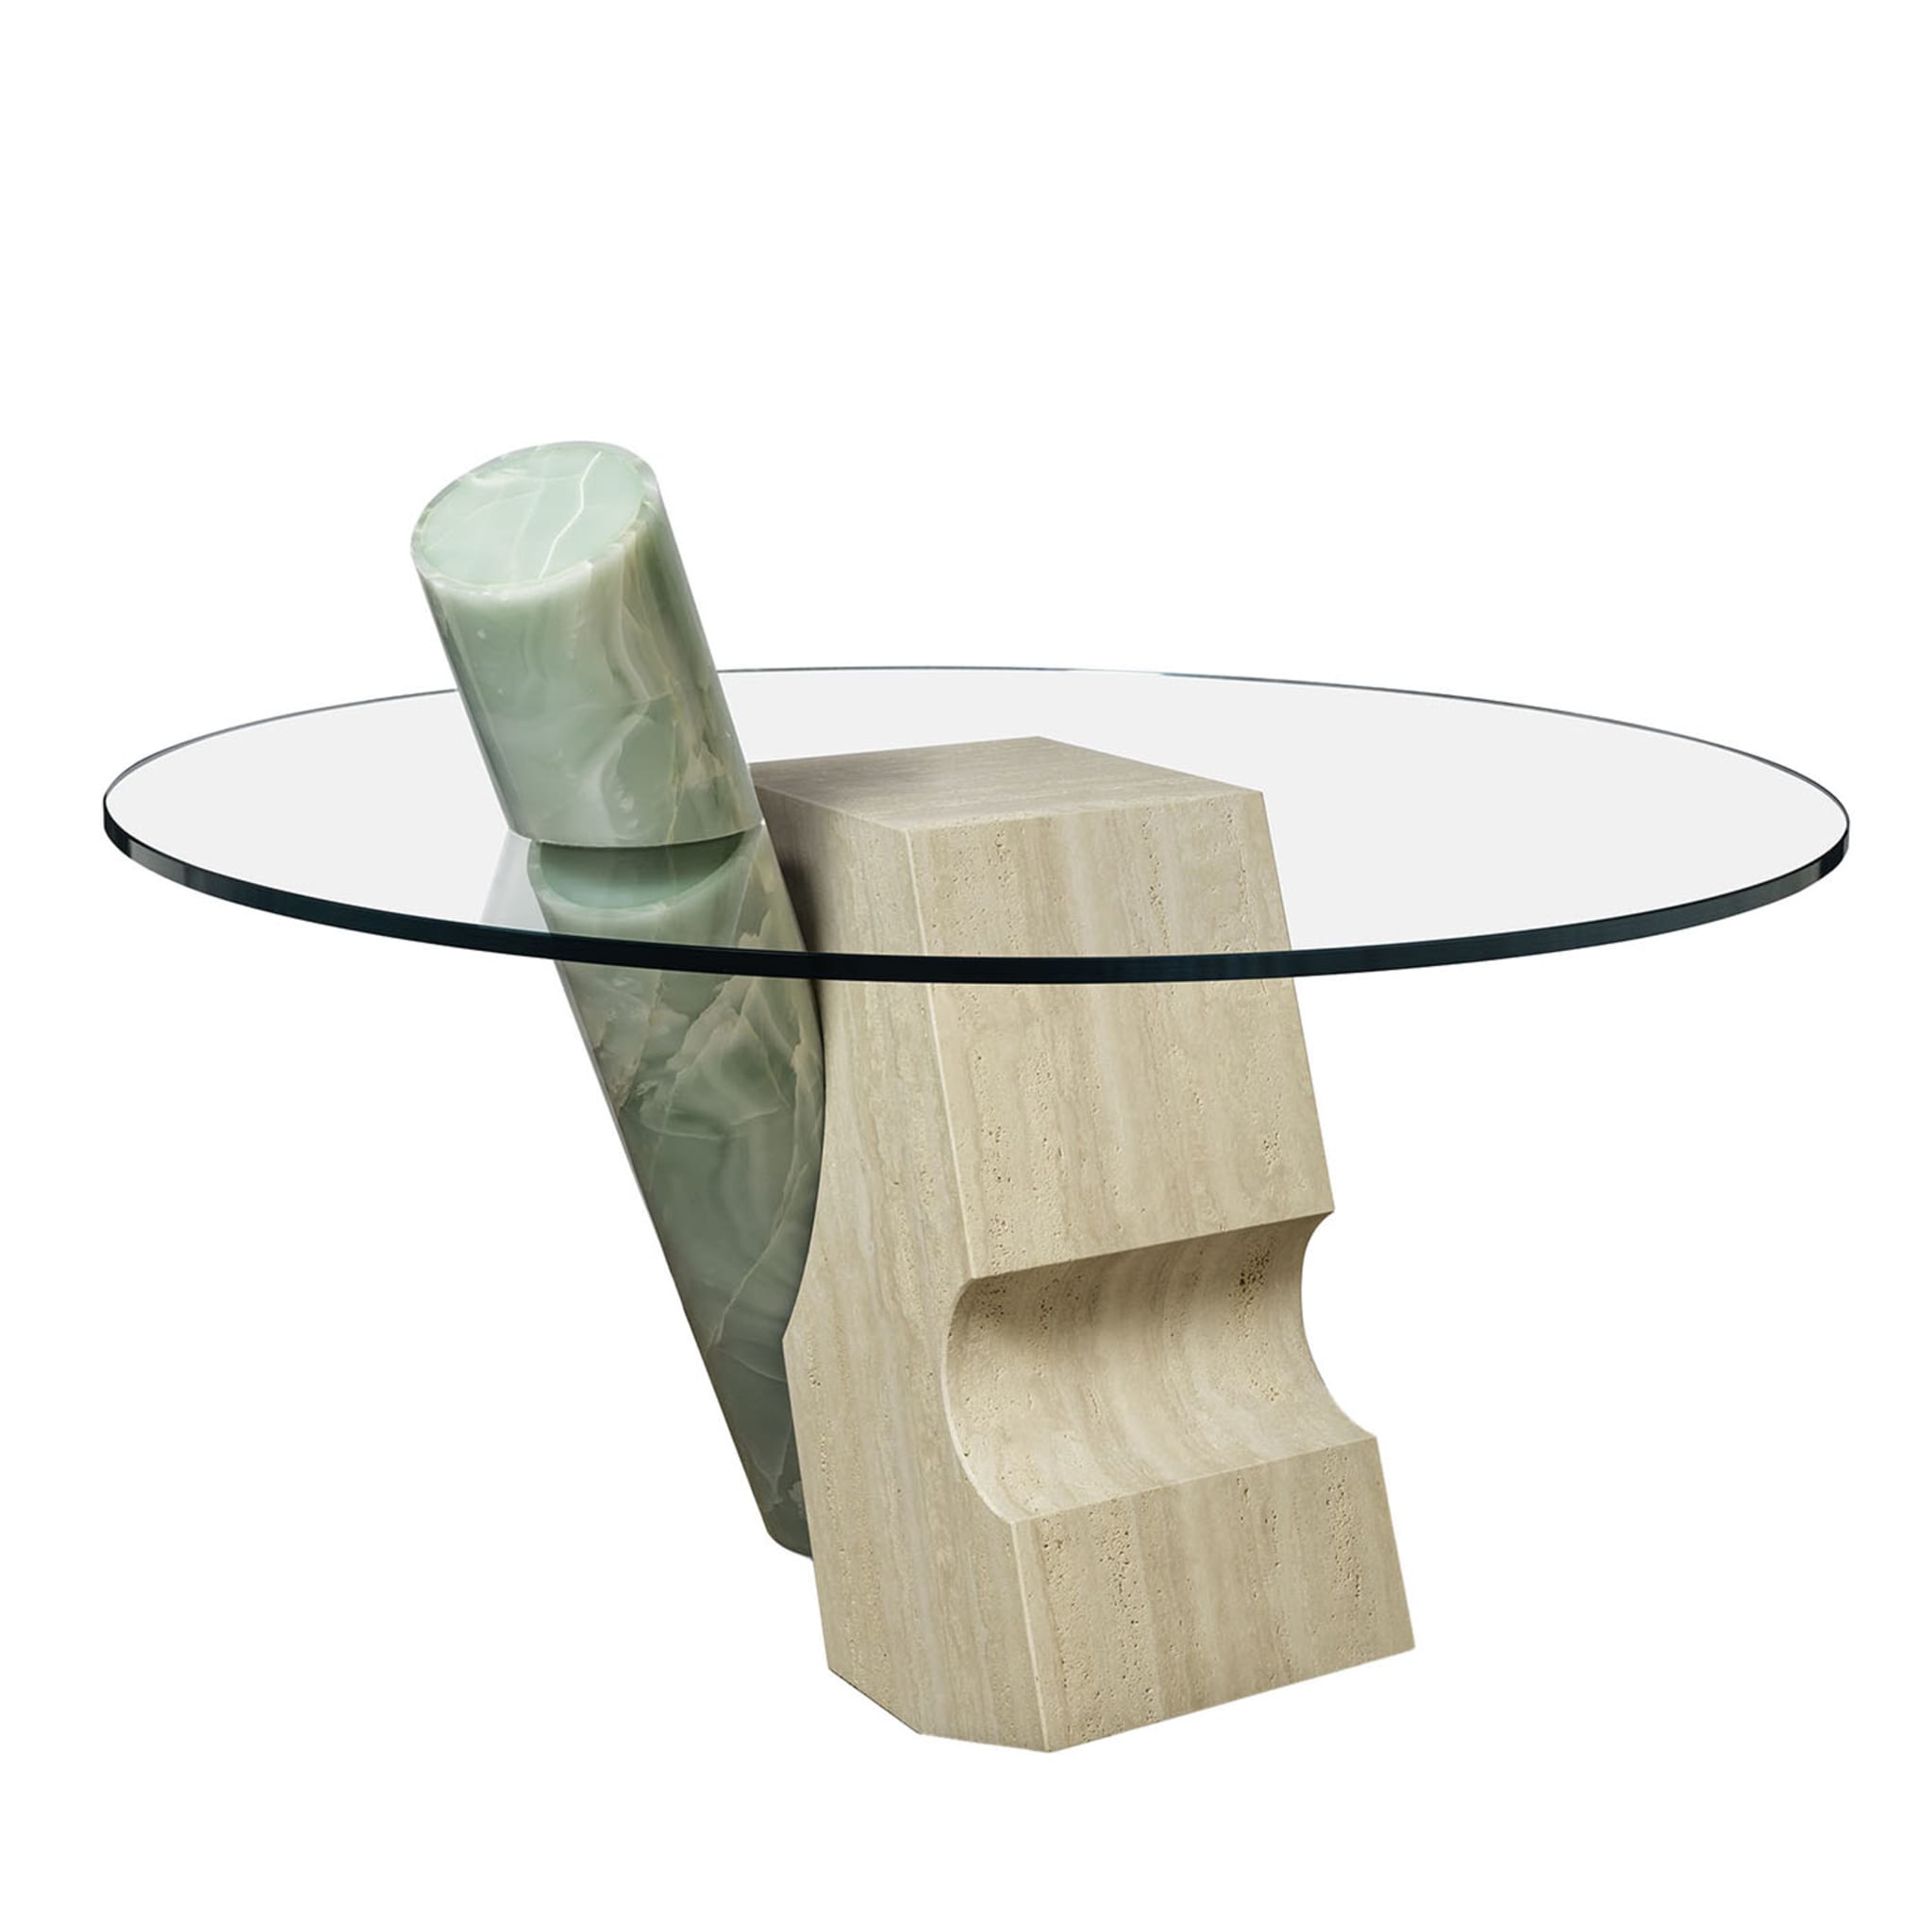 Pierce Living Round Table by Patricia Urquiola - Main view